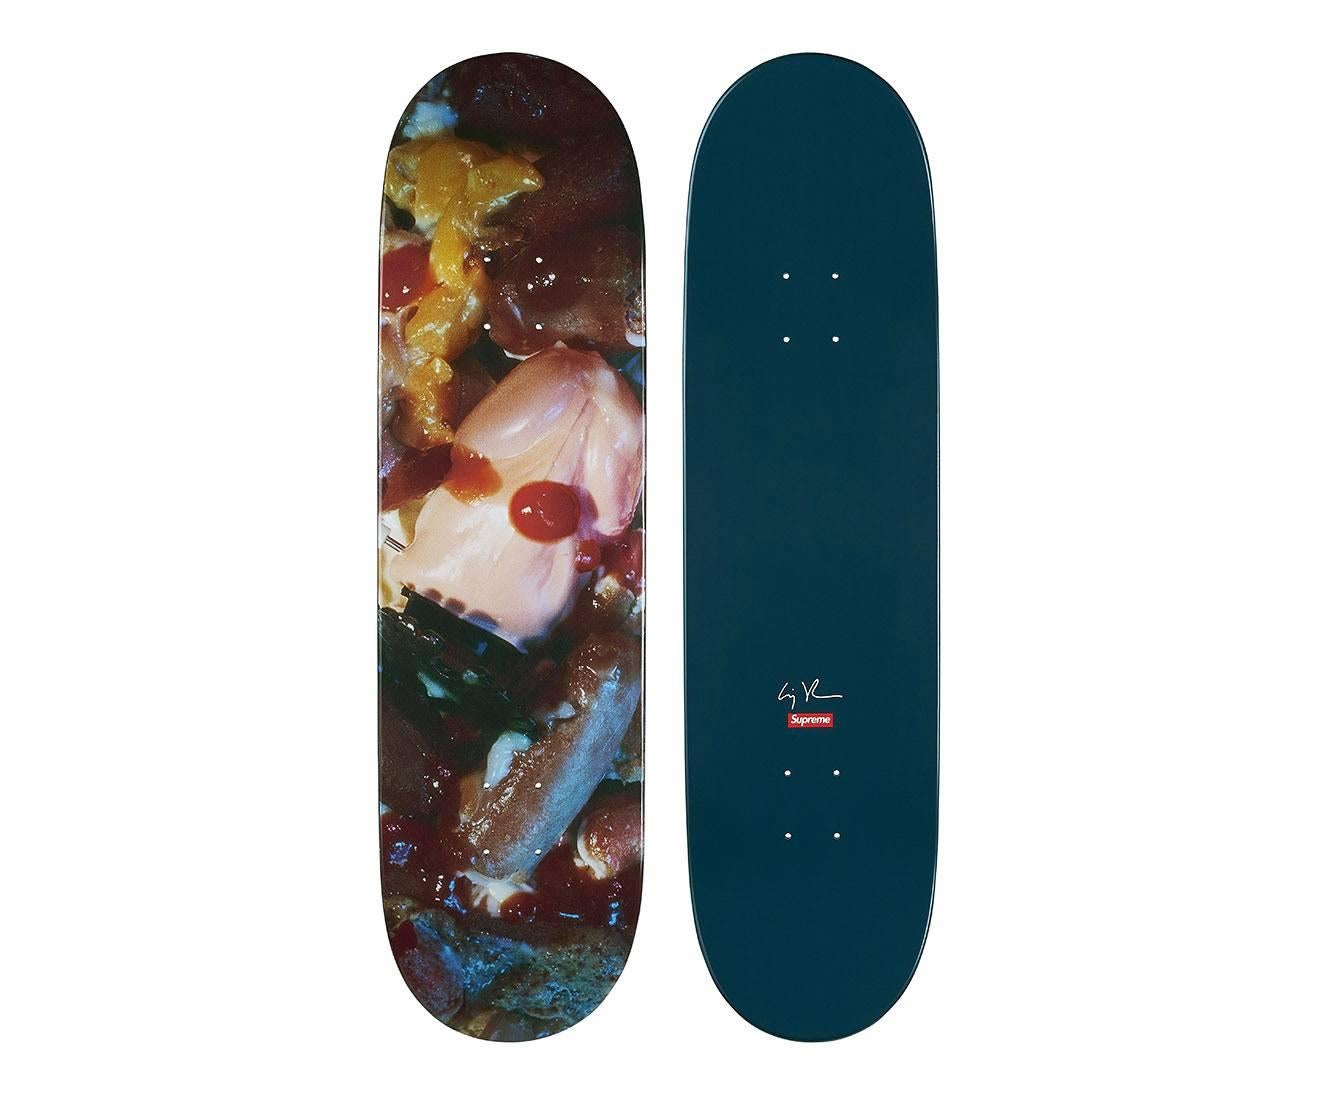 Cindy Sherman Supreme skateboard decks:
Born out of the collaboration between Cindy Sherman and Supreme in 2017, this sold-out skate diptych, features original images from Sherman's much heralded Grotesque Series of photo stills. Sherman’s printed